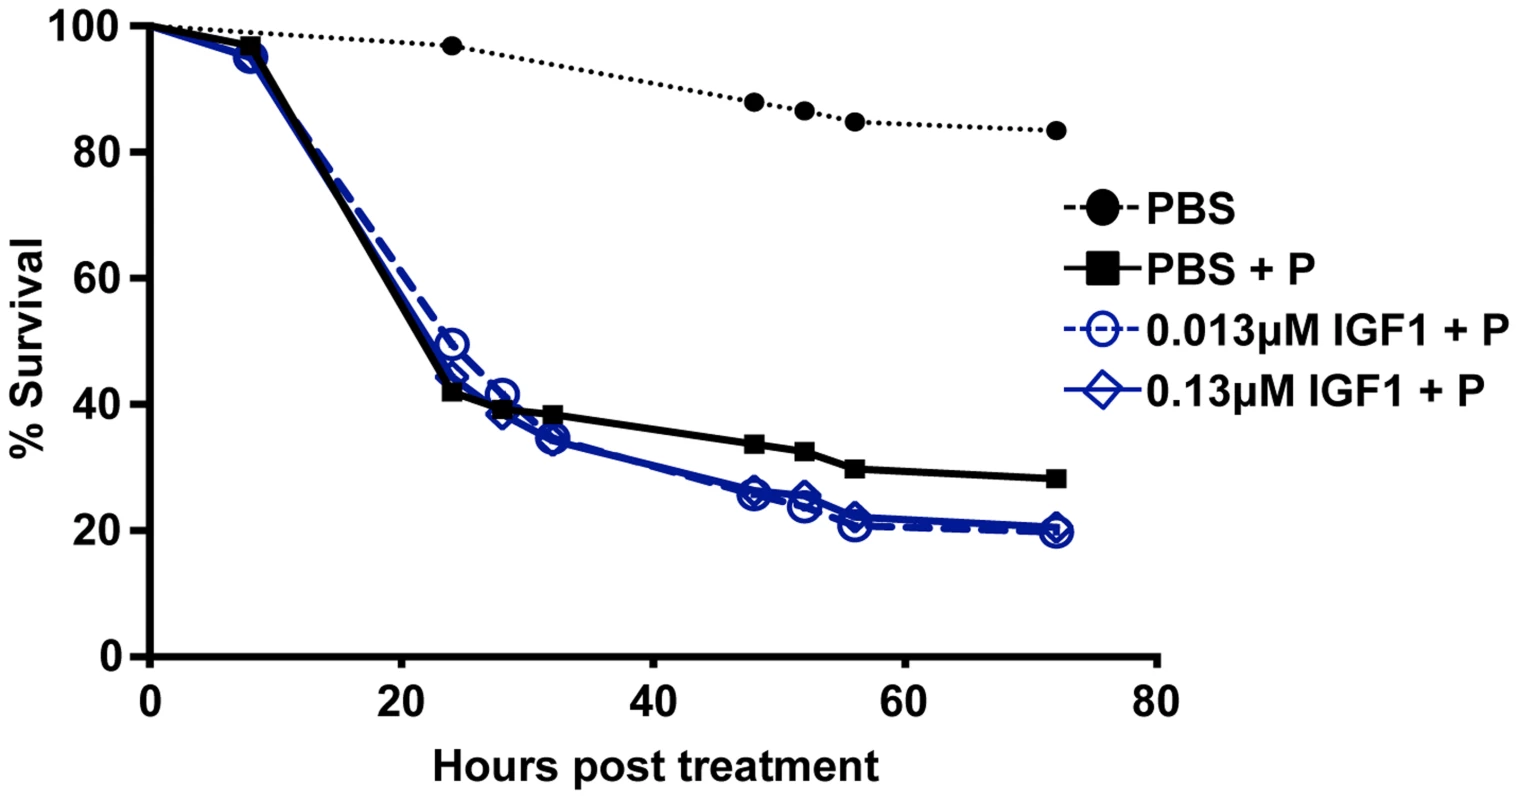 Effect of low dose IGF1 on <i>A. stephensi</i> survivorship was ablated by enhanced oxidative stress.